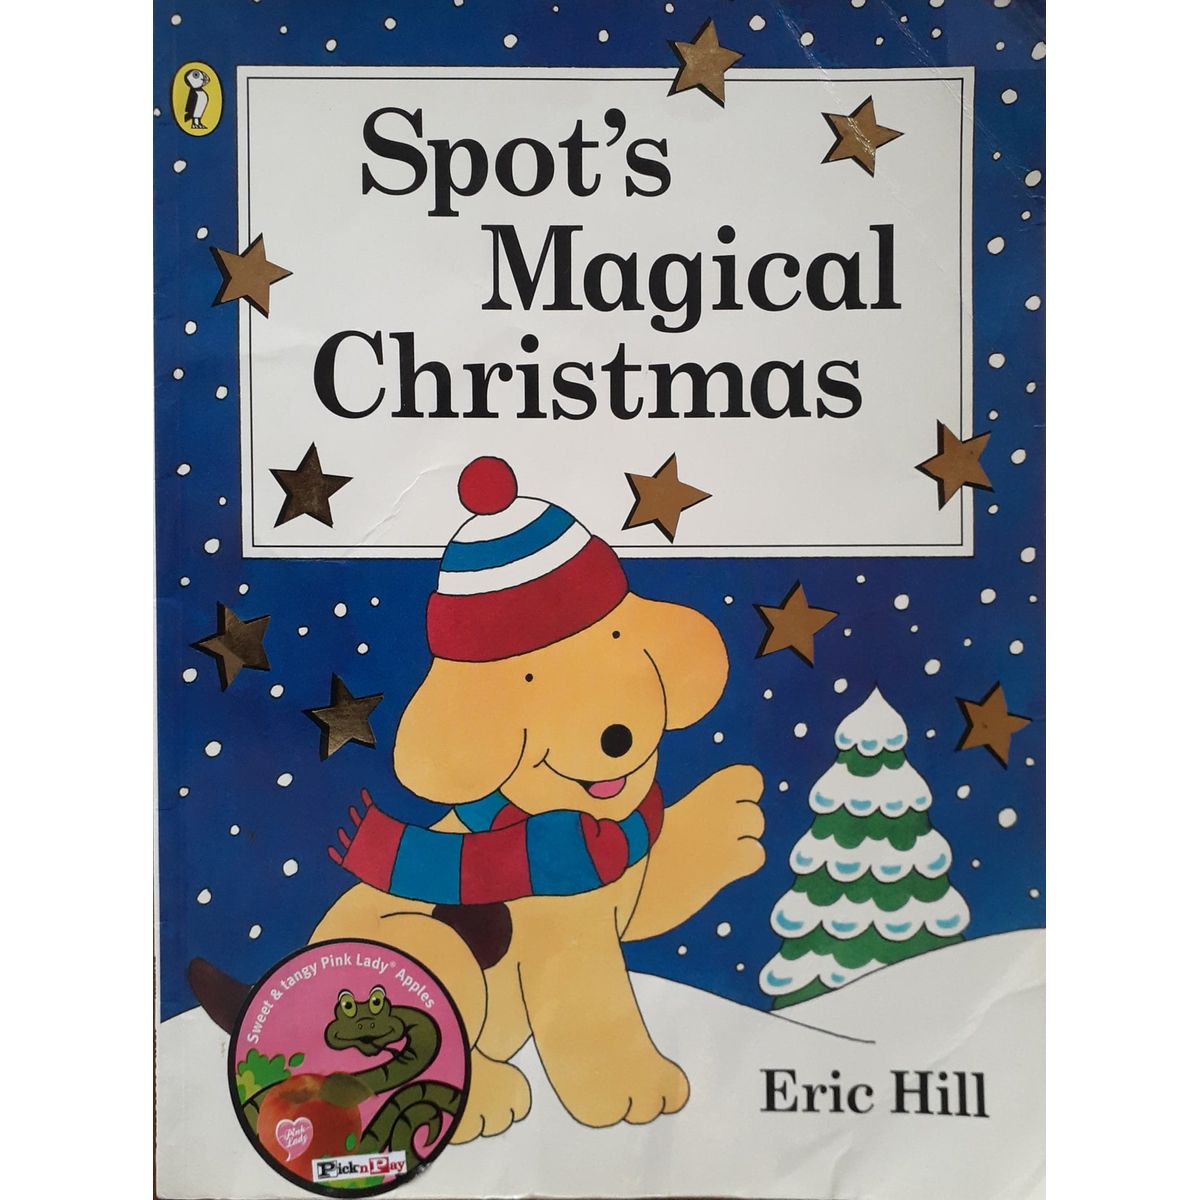 ISBN: 9780140557565 / 0140557563 - Spot's Magical Christmas by Eric Hill [1997]